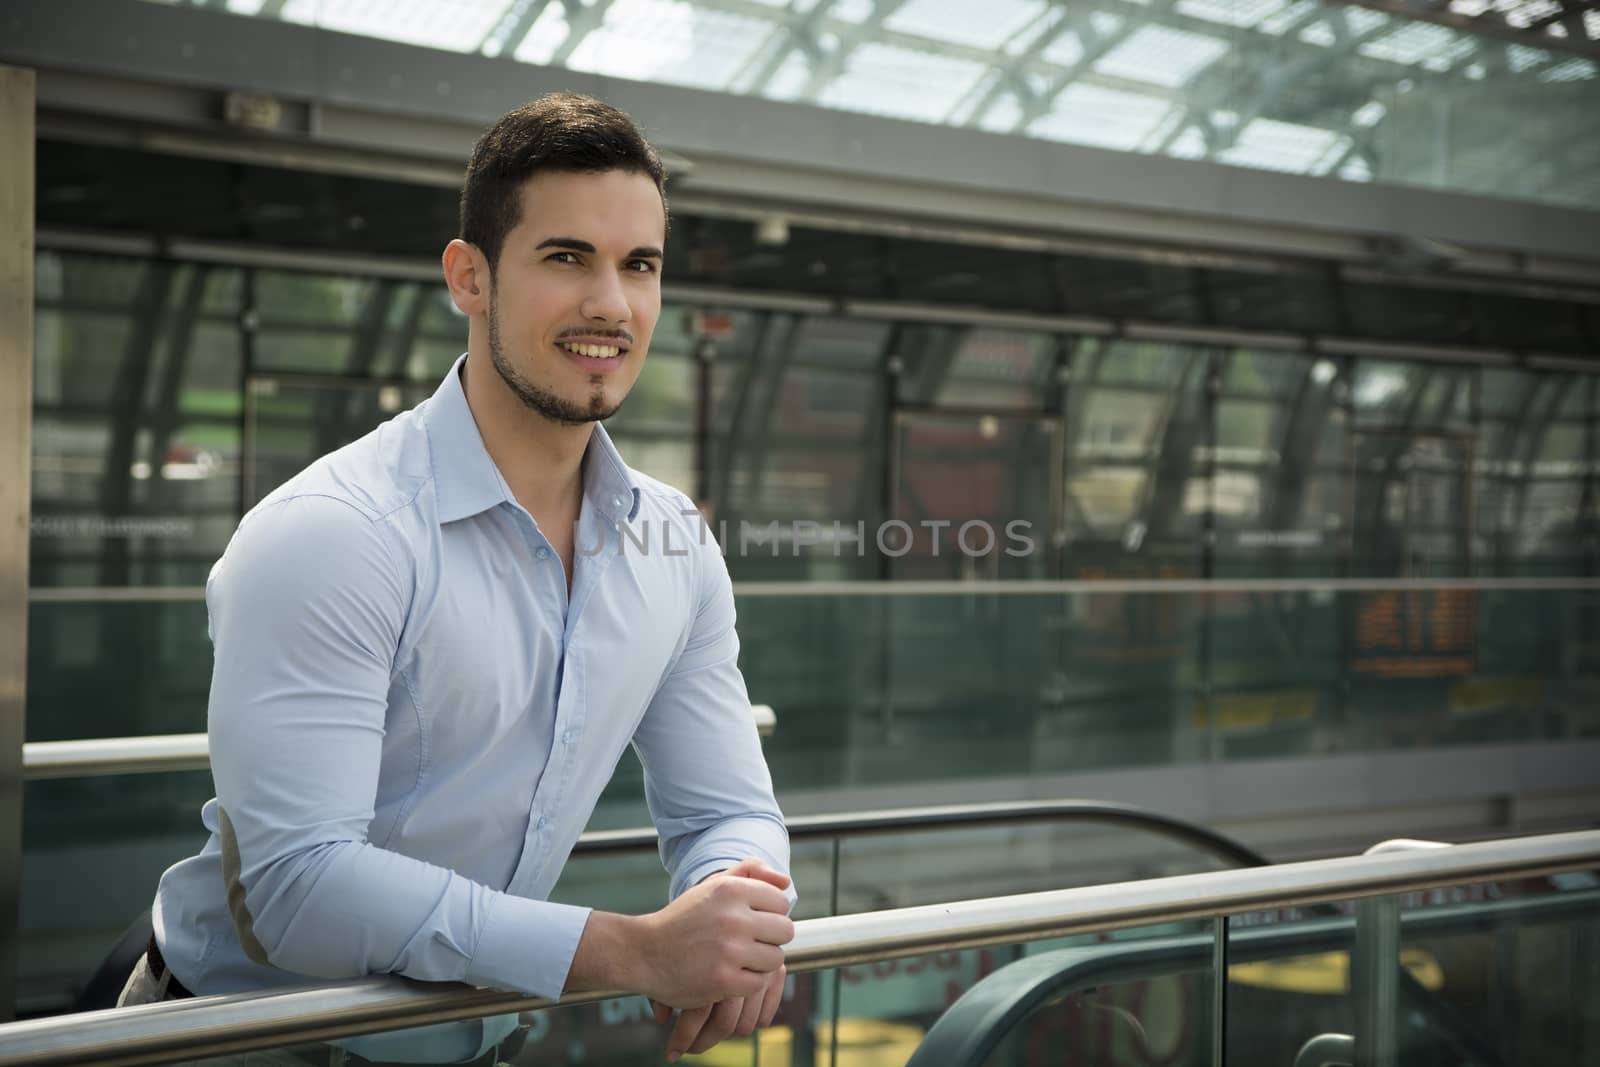 Handsome young man in train station or airport  by artofphoto